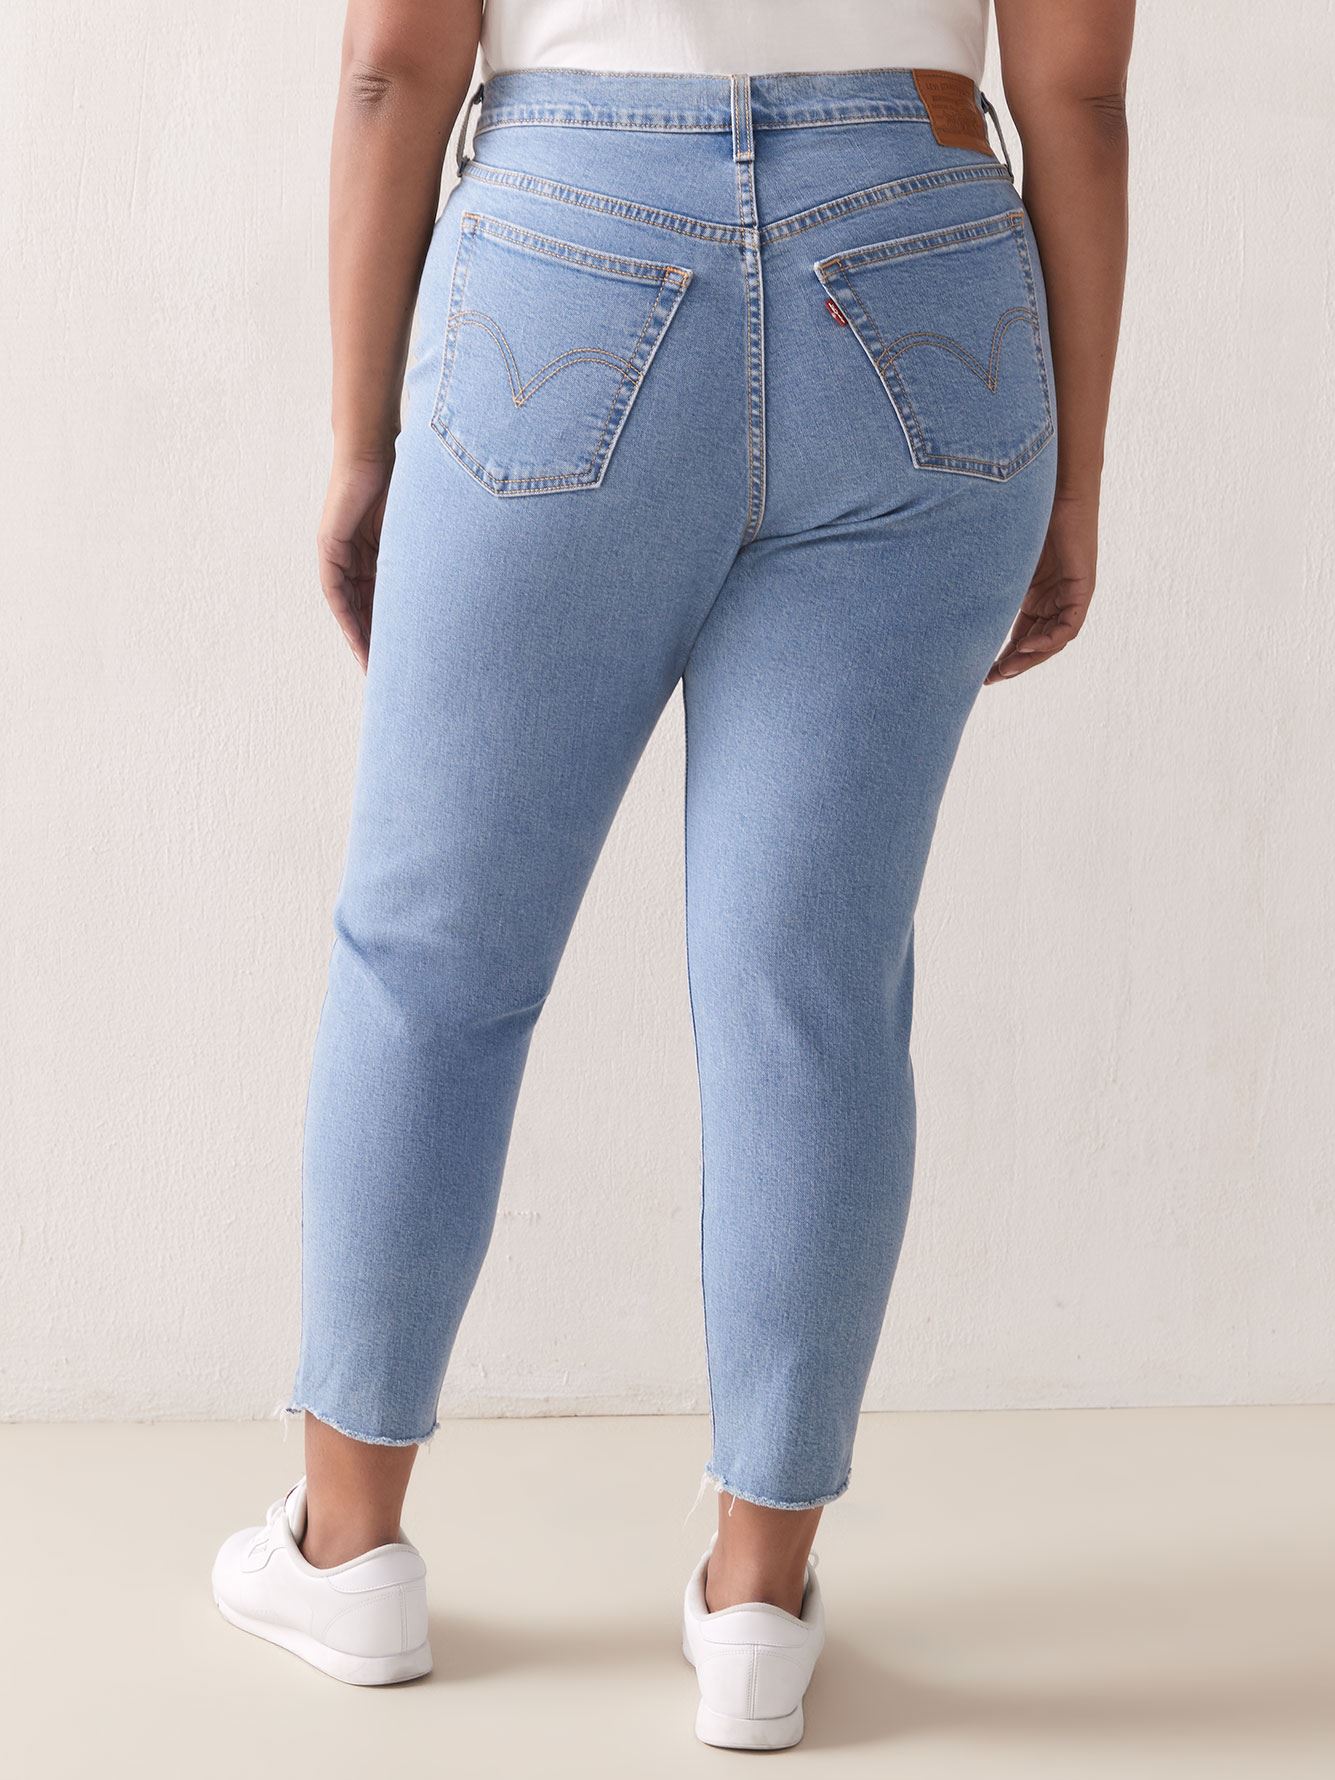 Stretchy High-Rise Wedgie Skinny Ankle Length Jean - Levi's Premium |  Penningtons